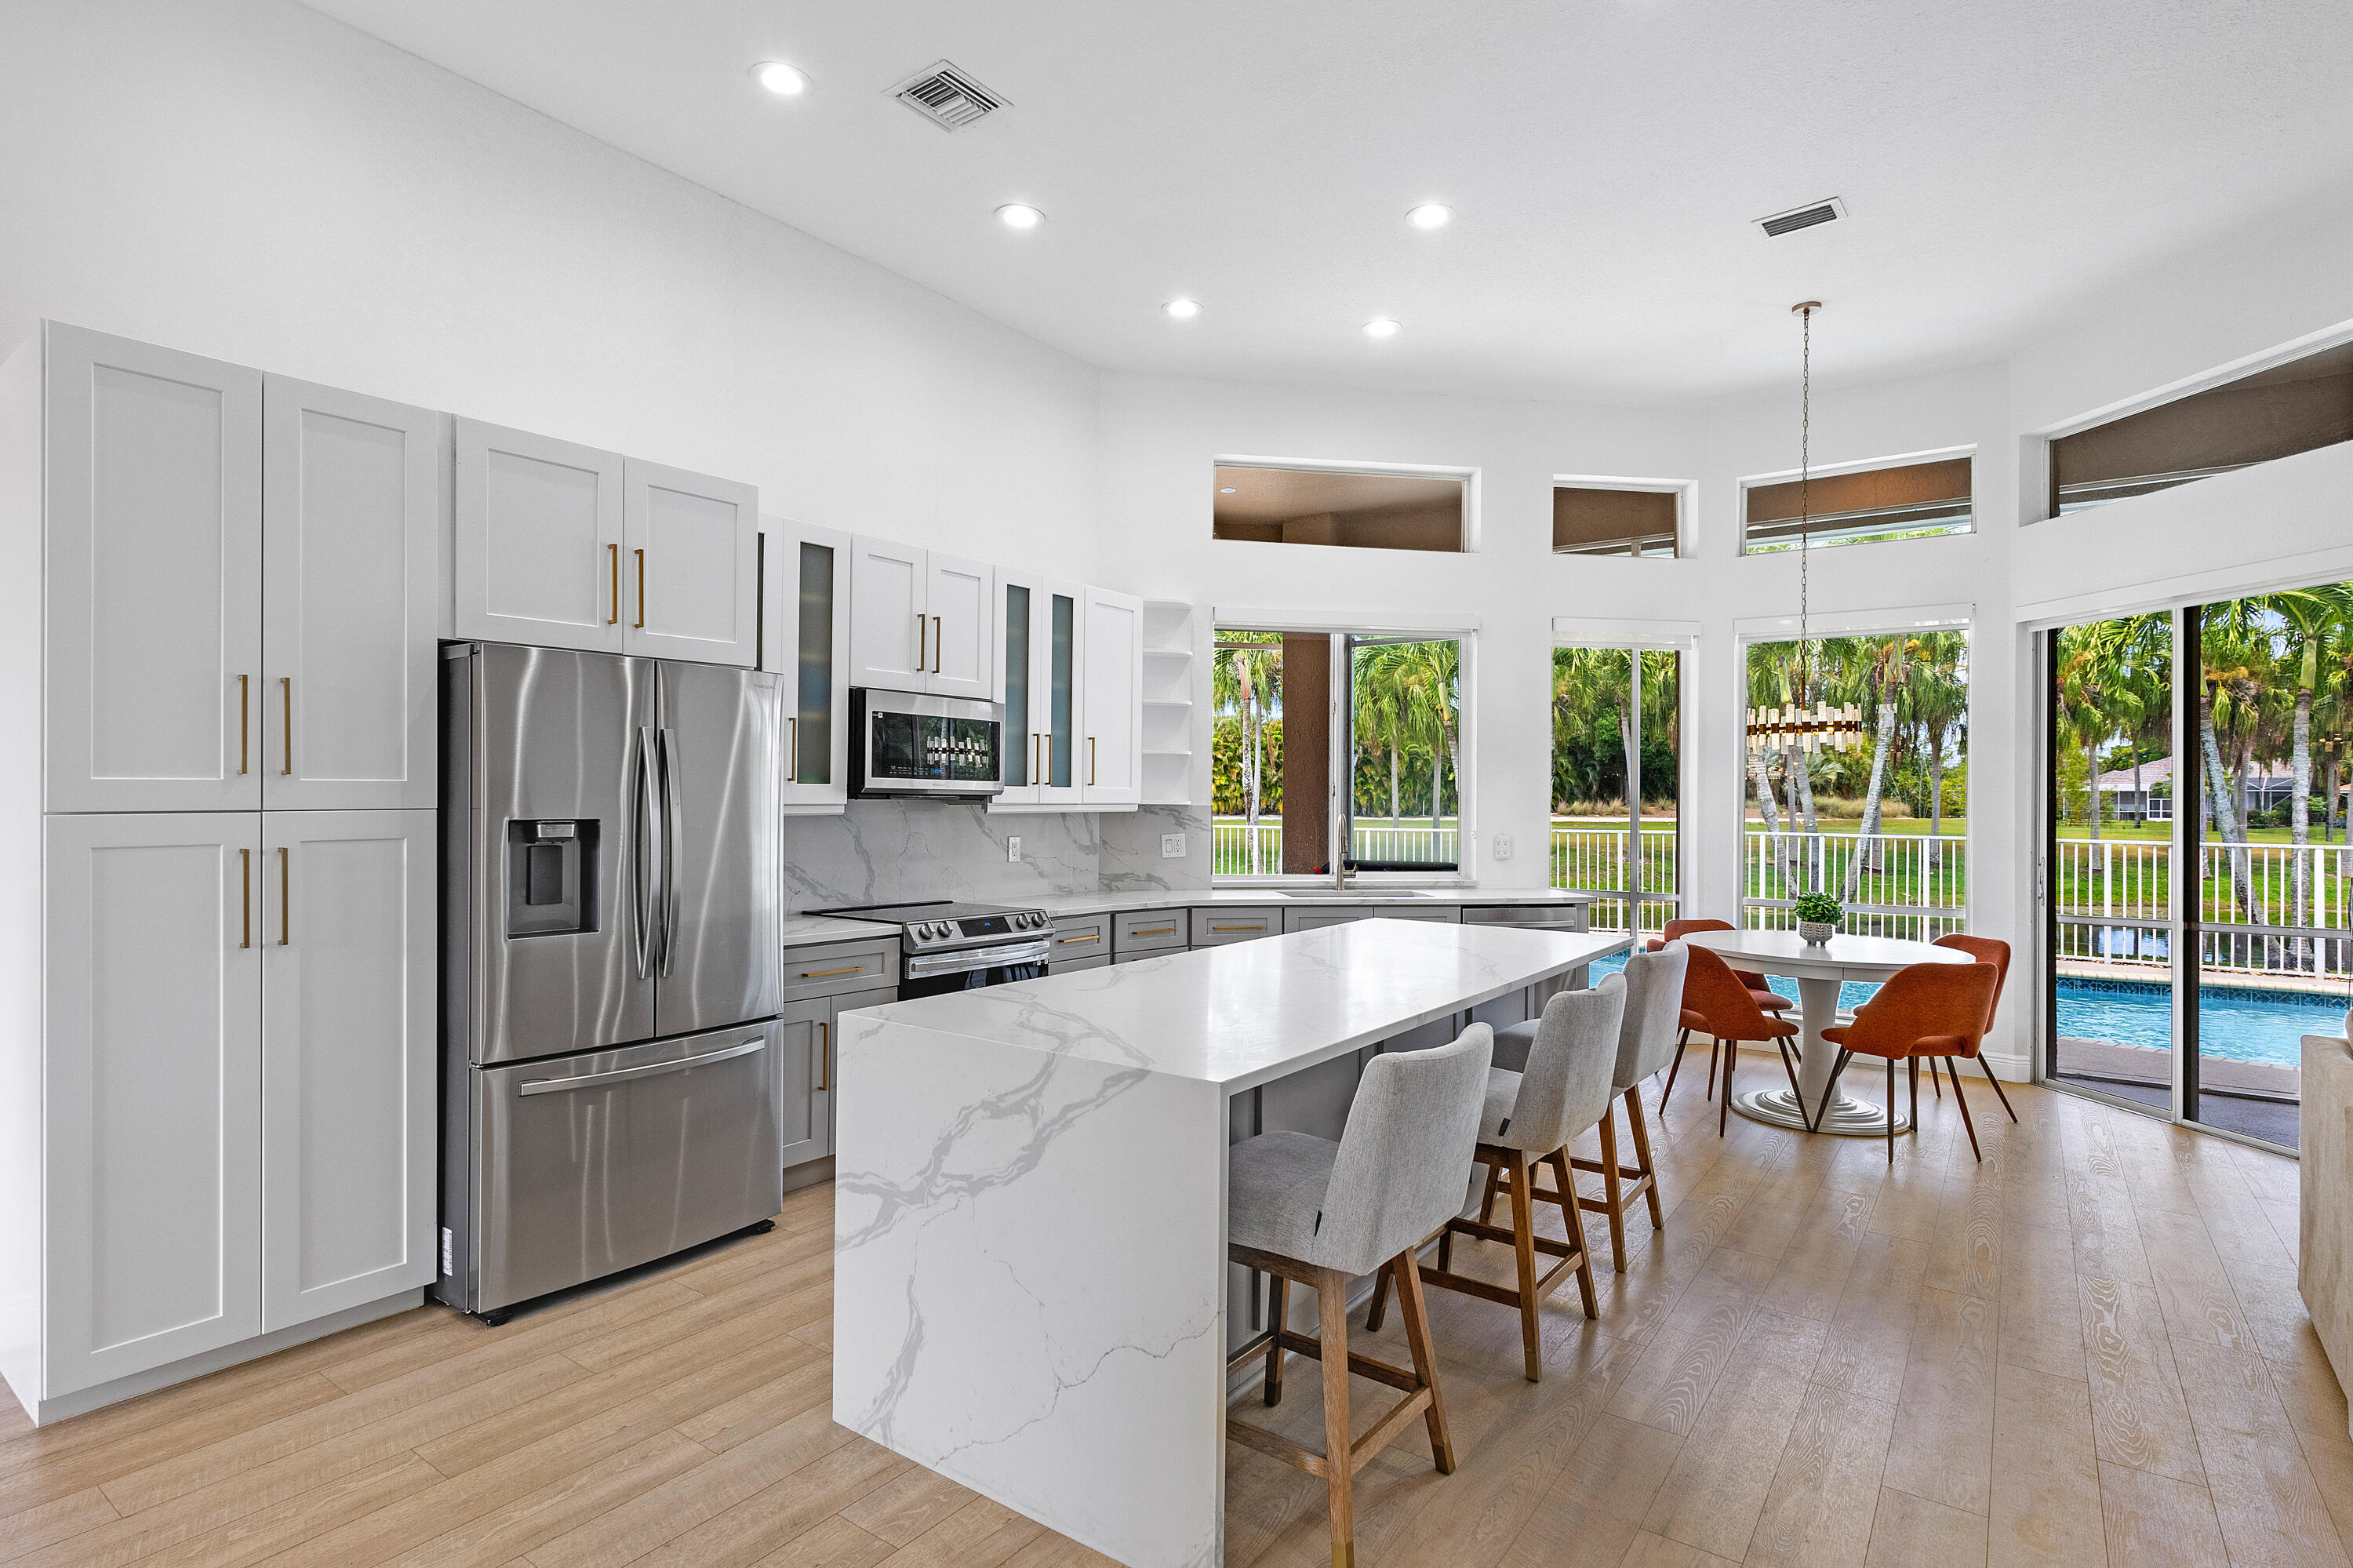 a kitchen with granite countertop a table chairs stainless steel appliances and wooden floor